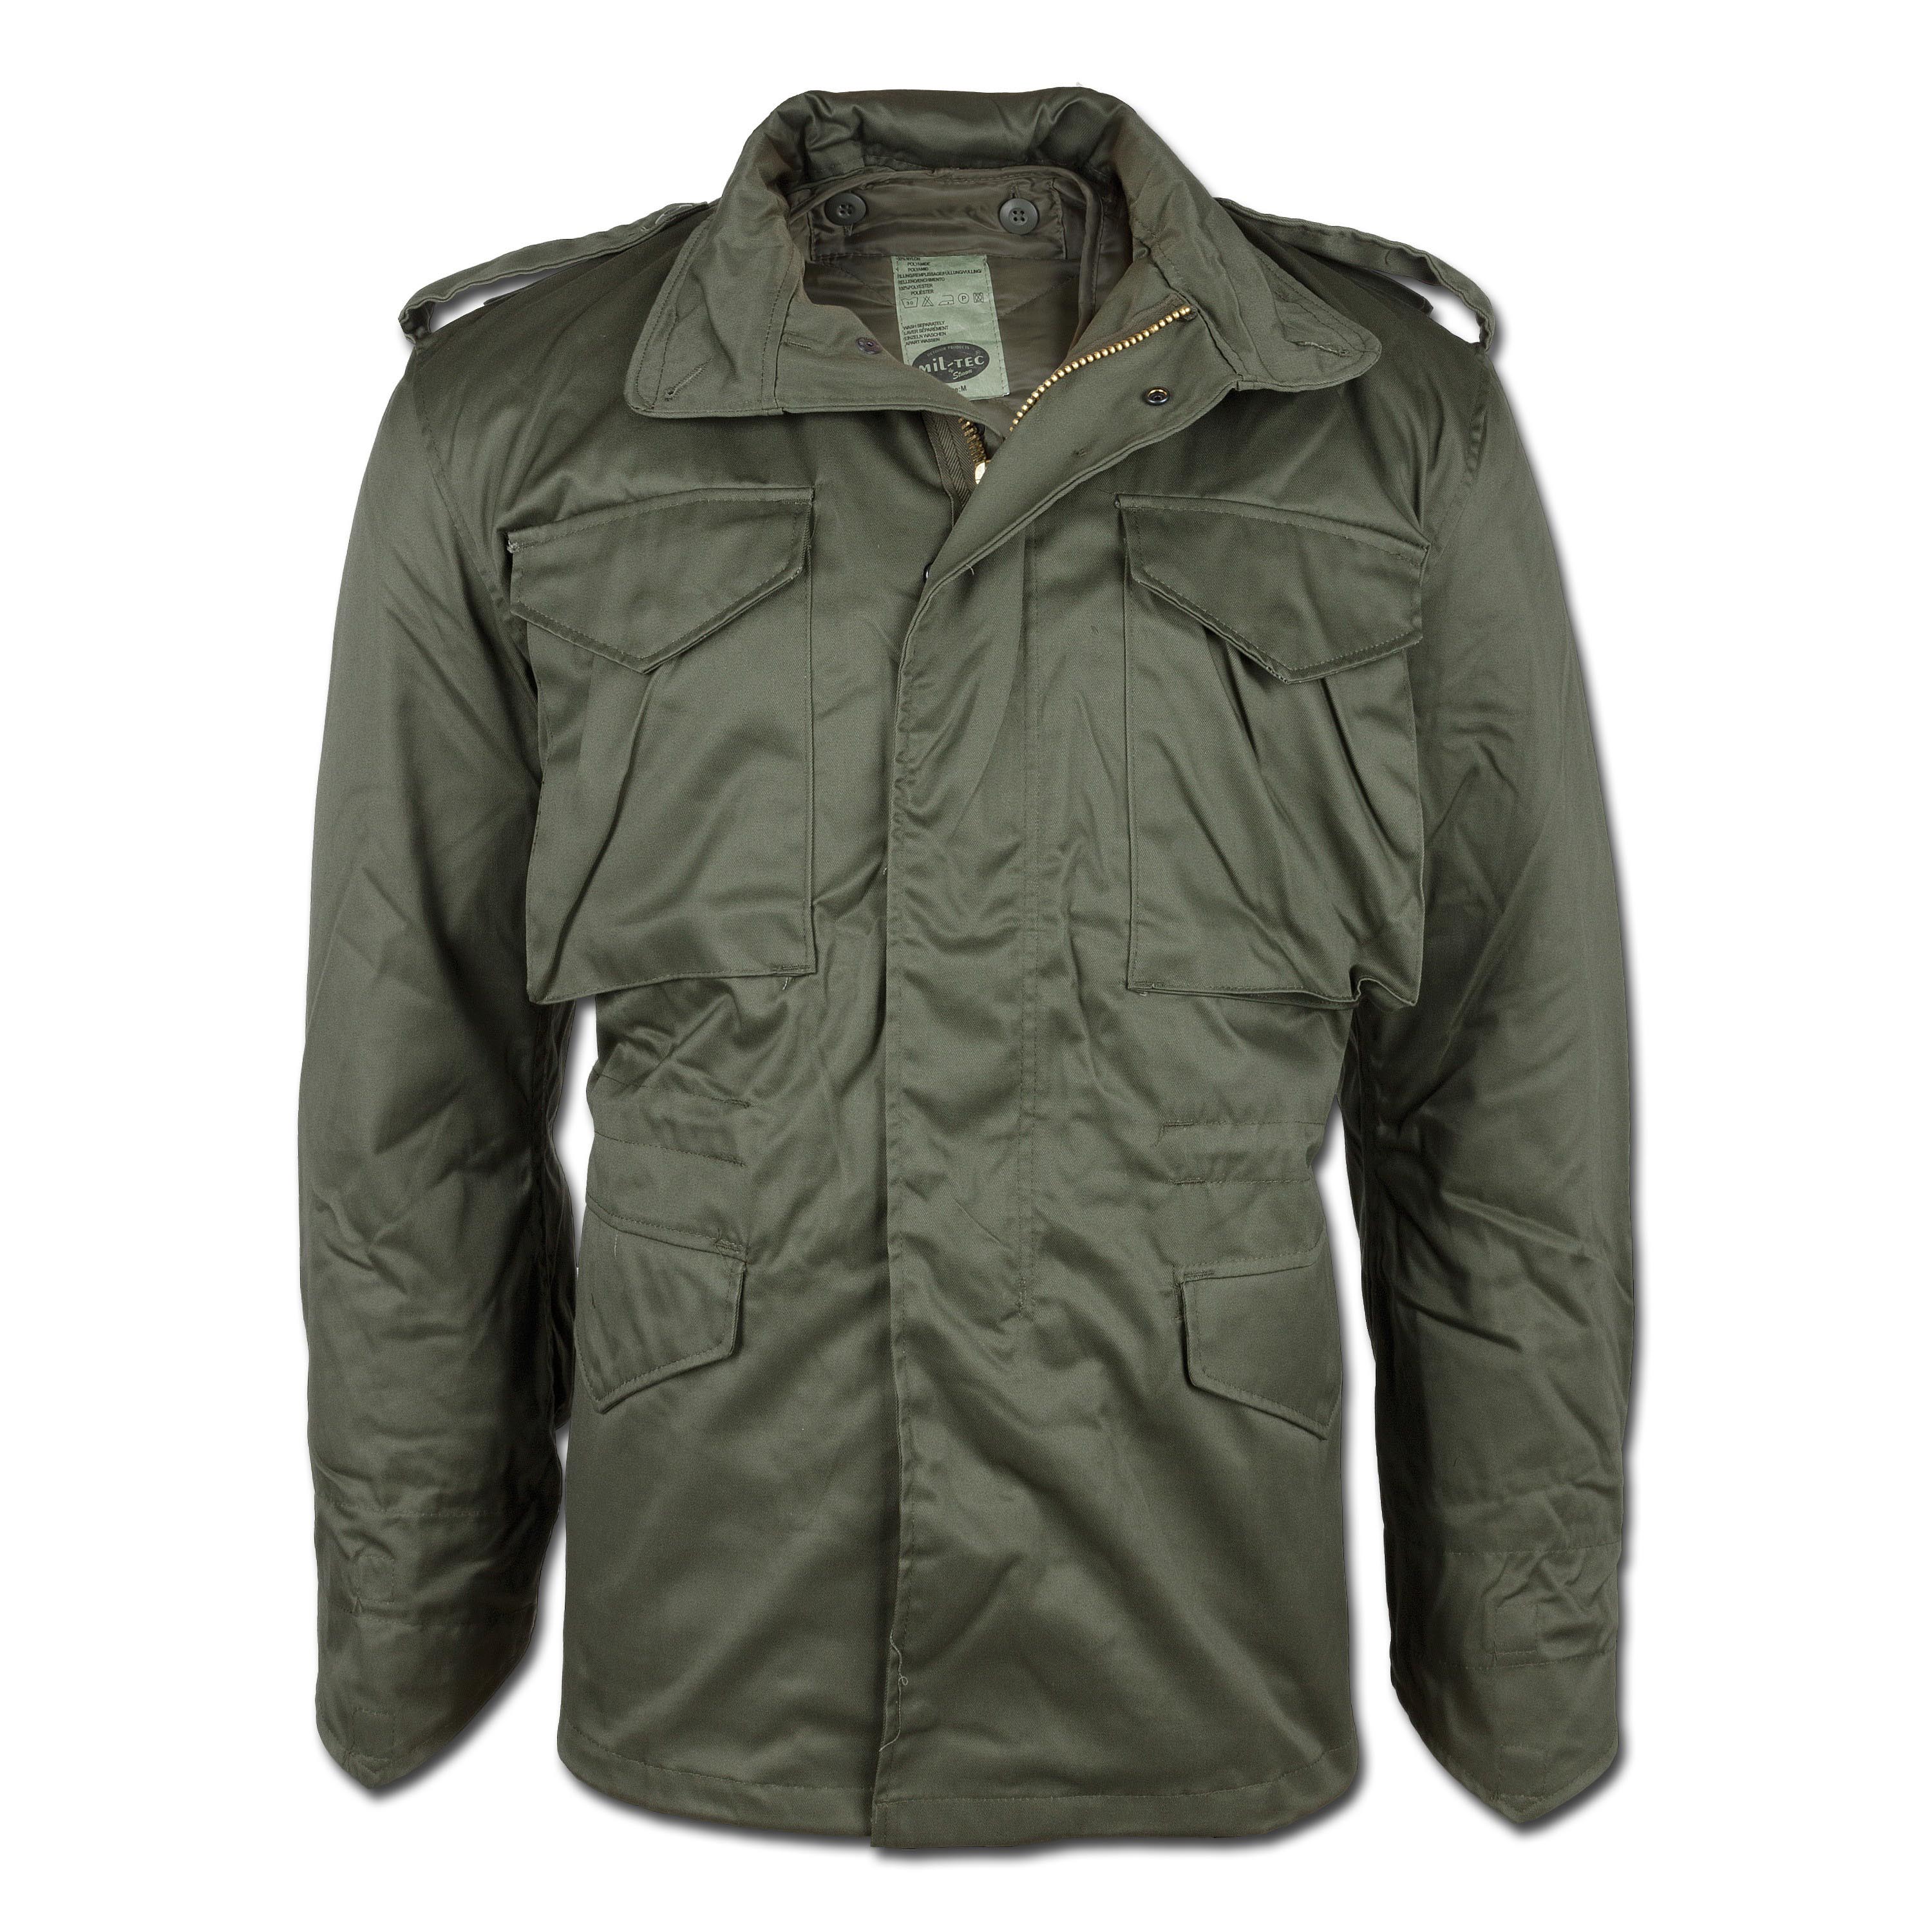 Purchase the Field Jacket M-65 Style olive by ASMC